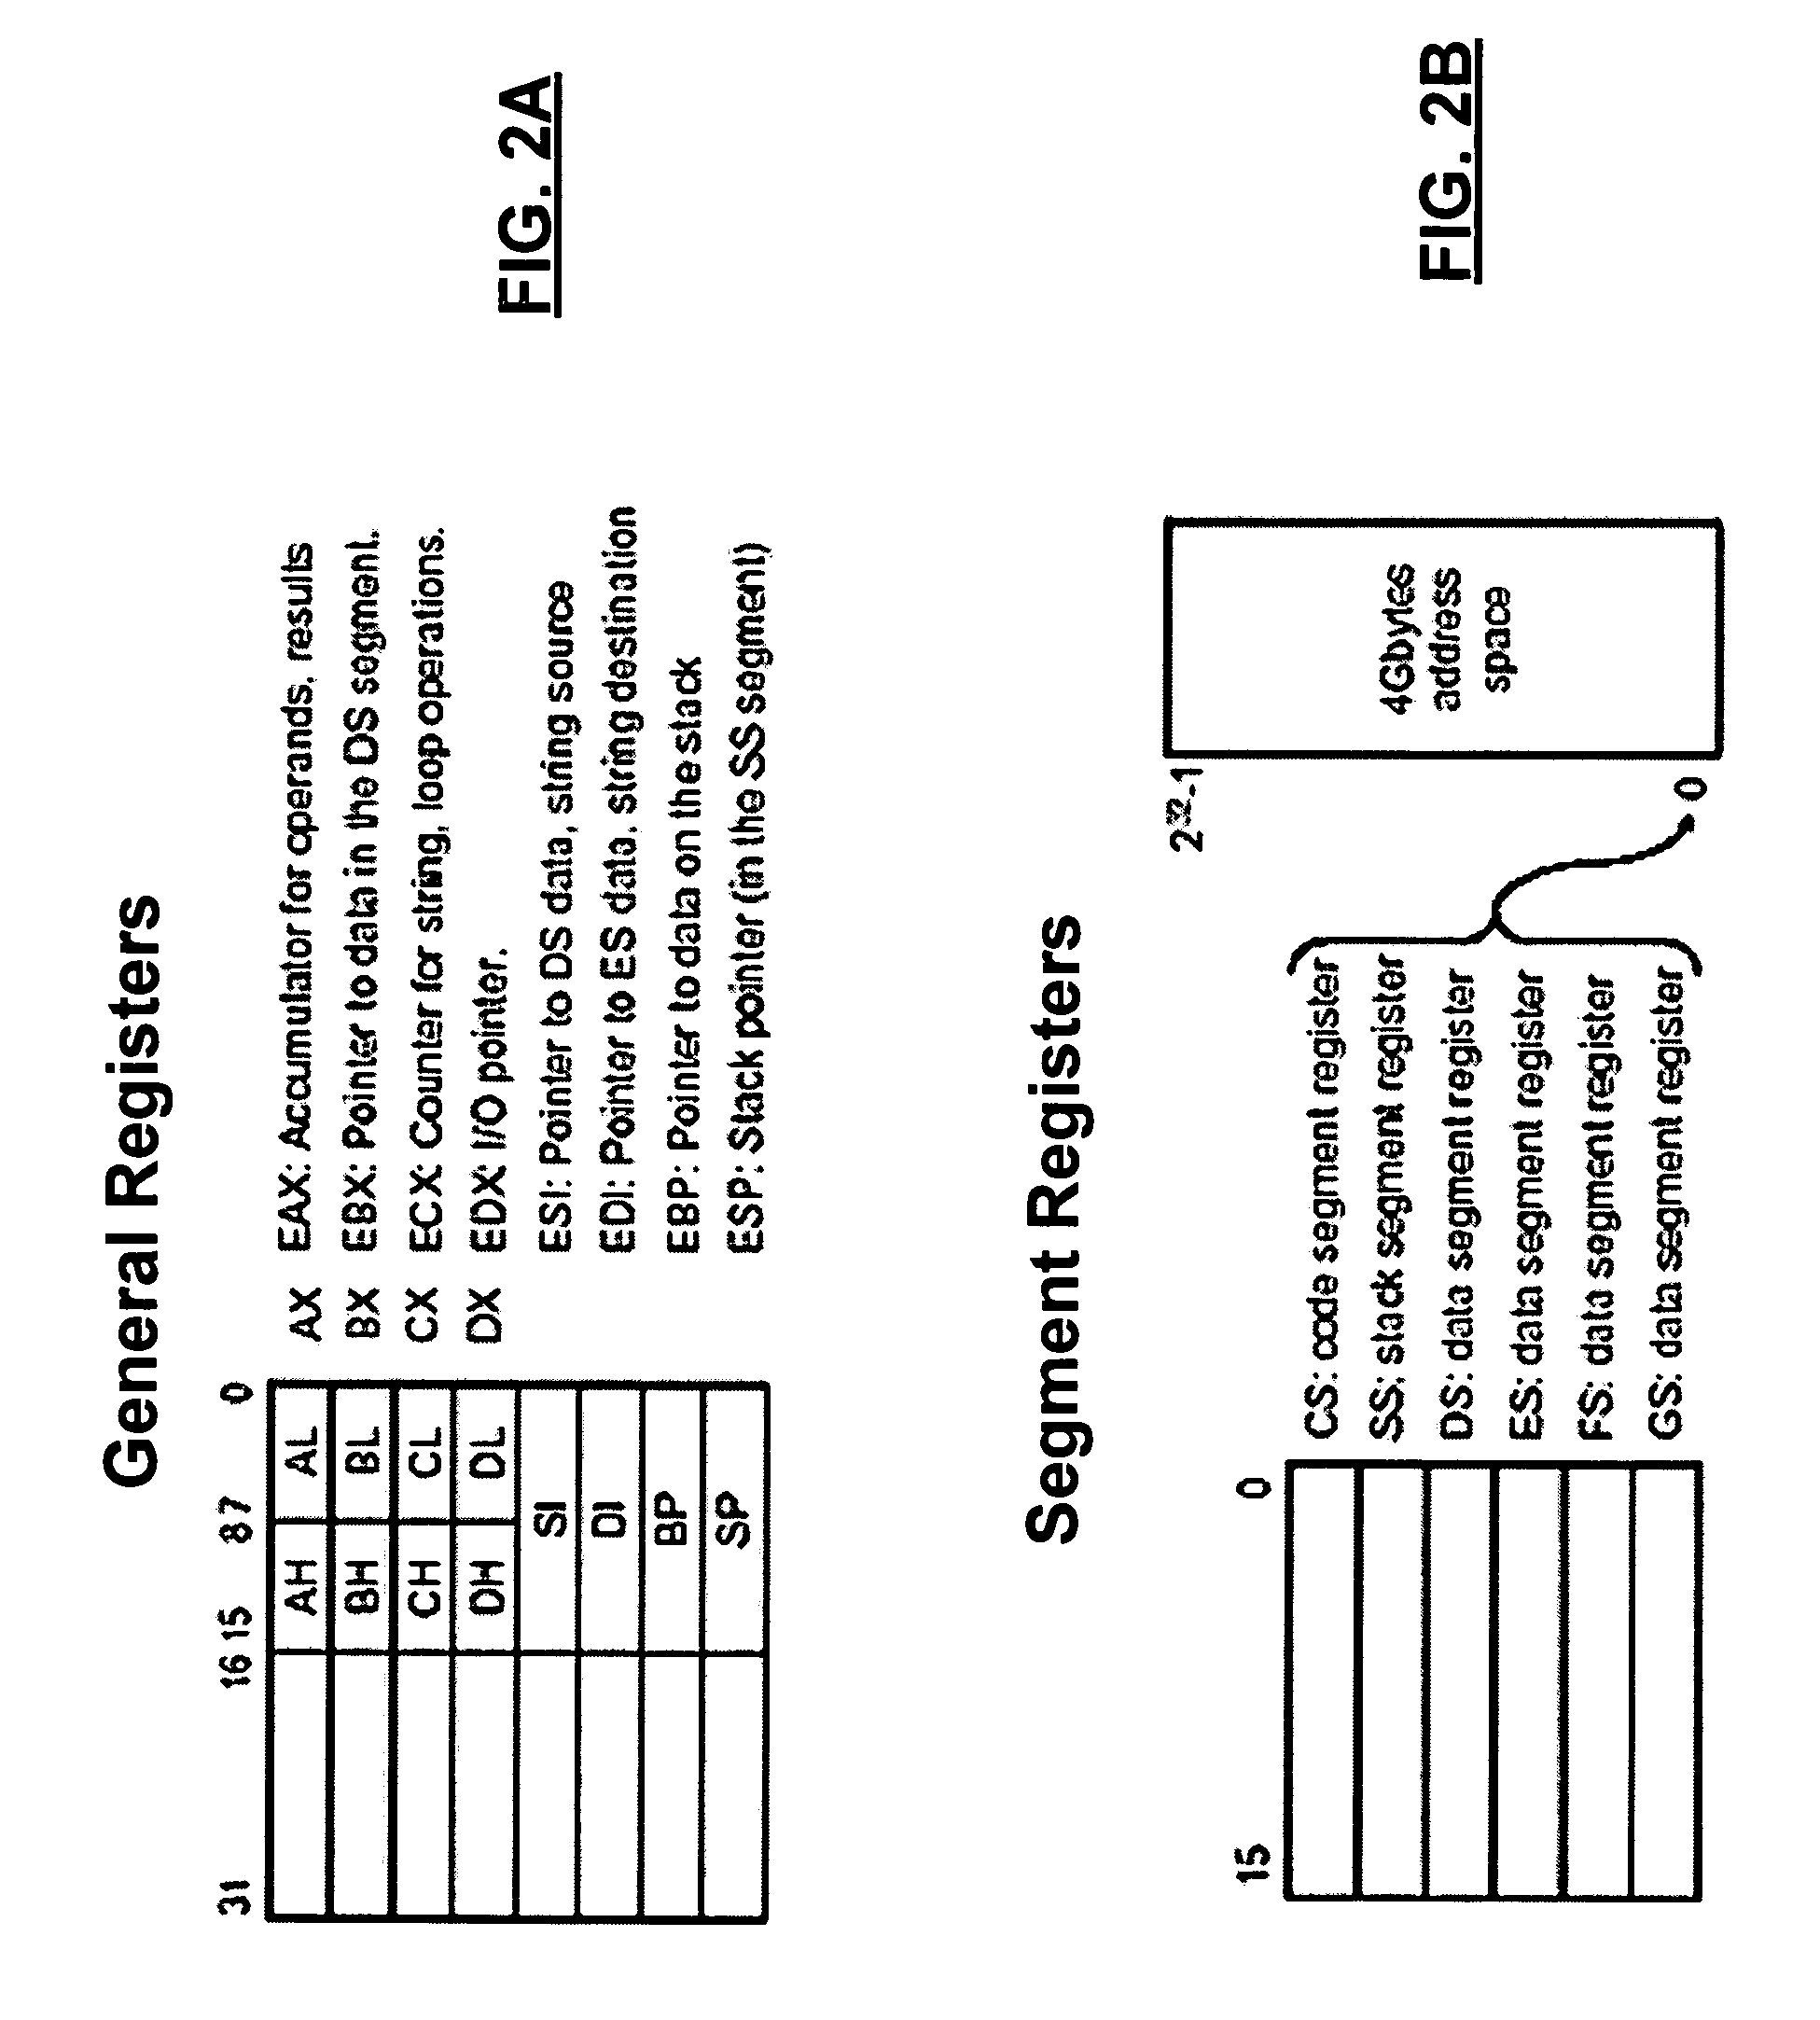 Systems and methods for improving the x86 architecture for processor virtualization, and software systems and methods for utilizing the improvements